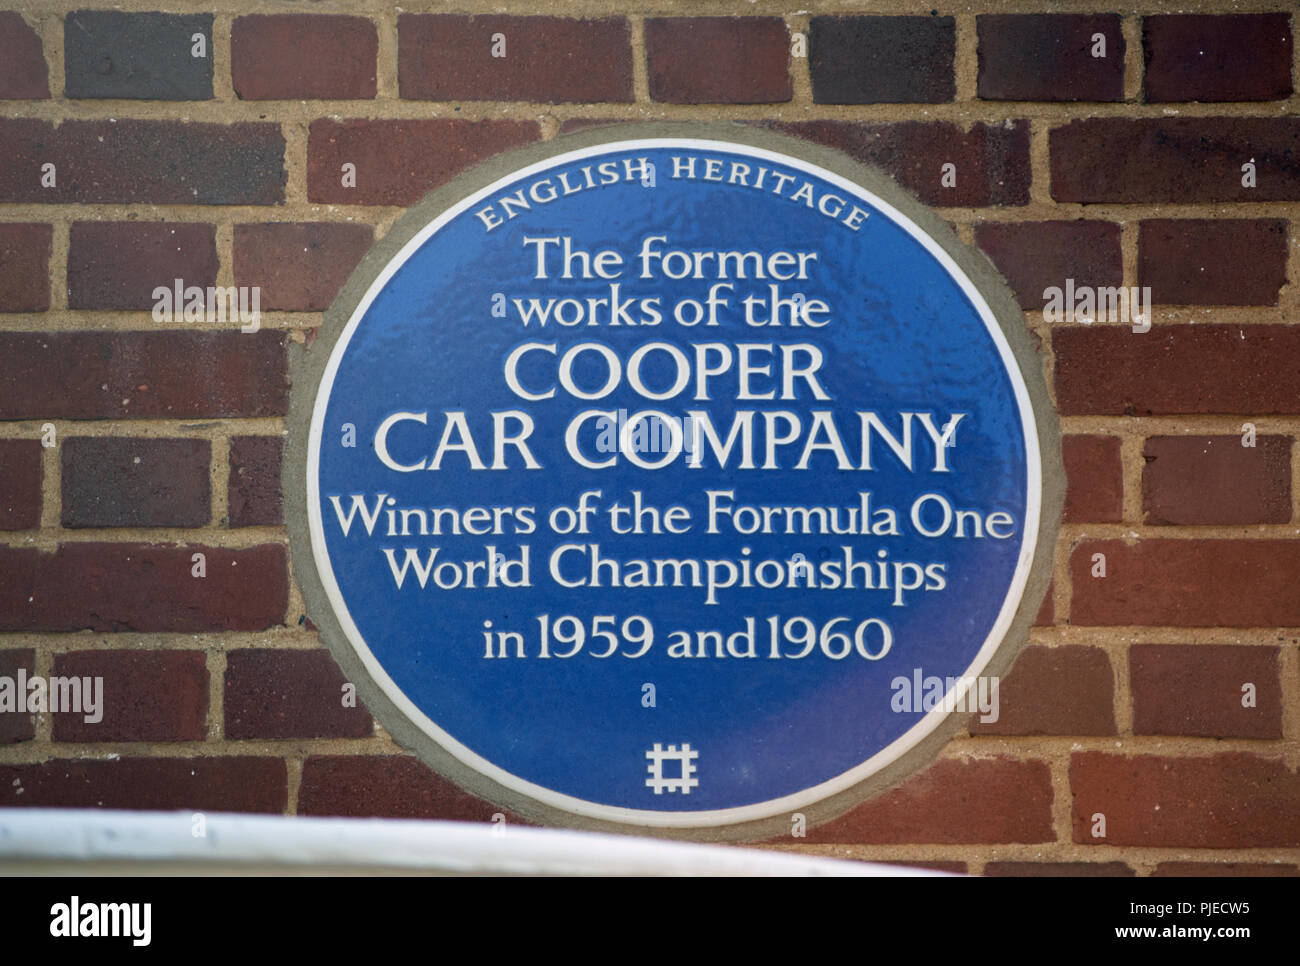 english heritage blue plaque marking the former works of the cooper car company, surbiton, surrey, england Stock Photo